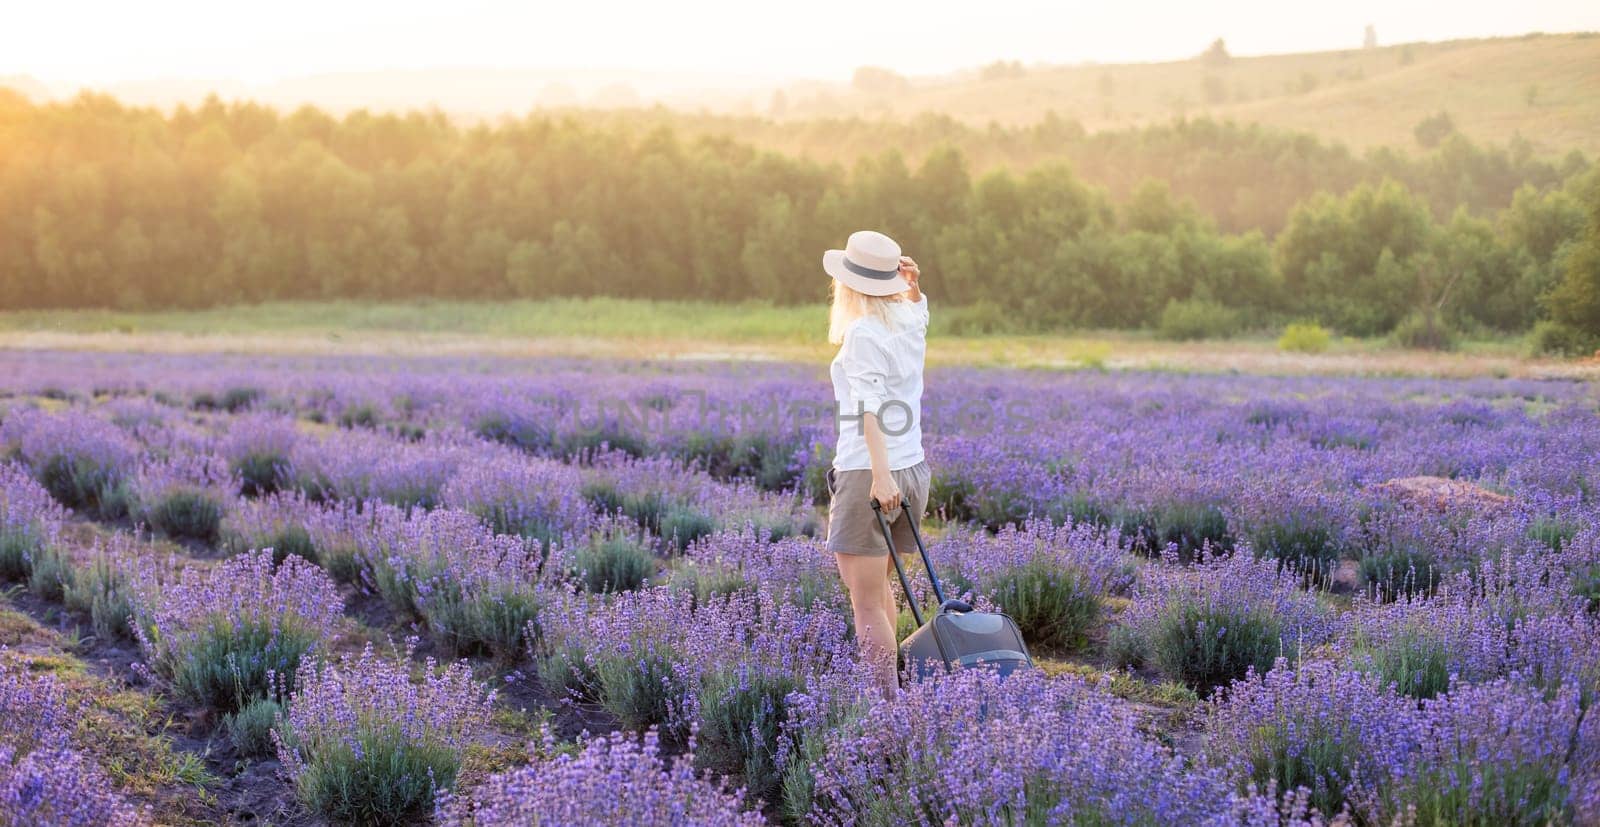 woman with suitcase in lavender field. by Andelov13